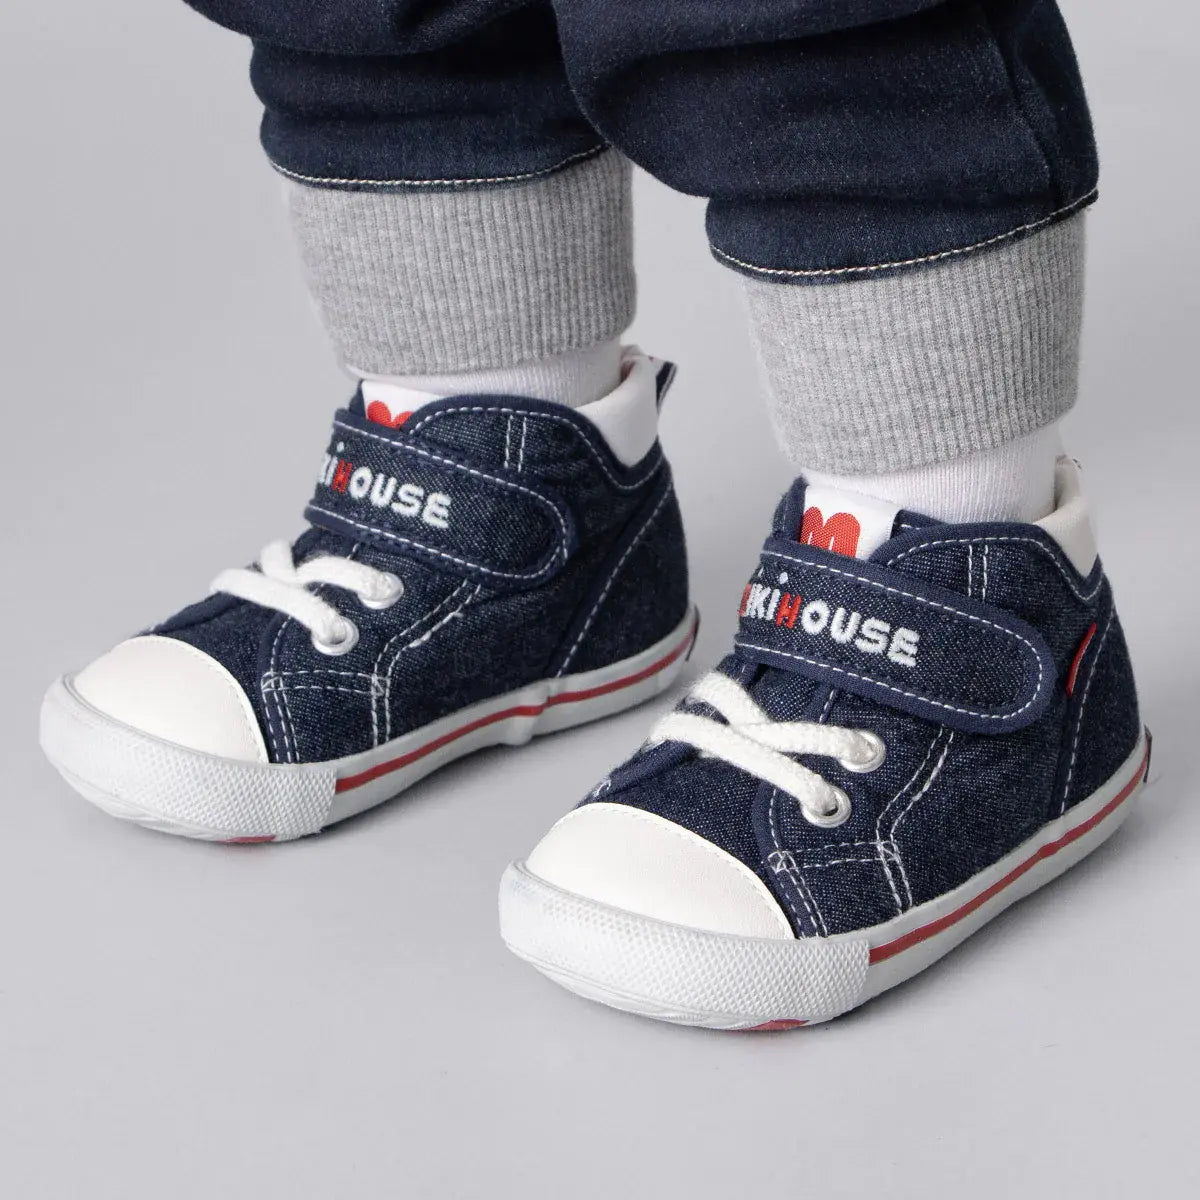 Japan mikihouse toddler canvas shoes second section 10-9302-498